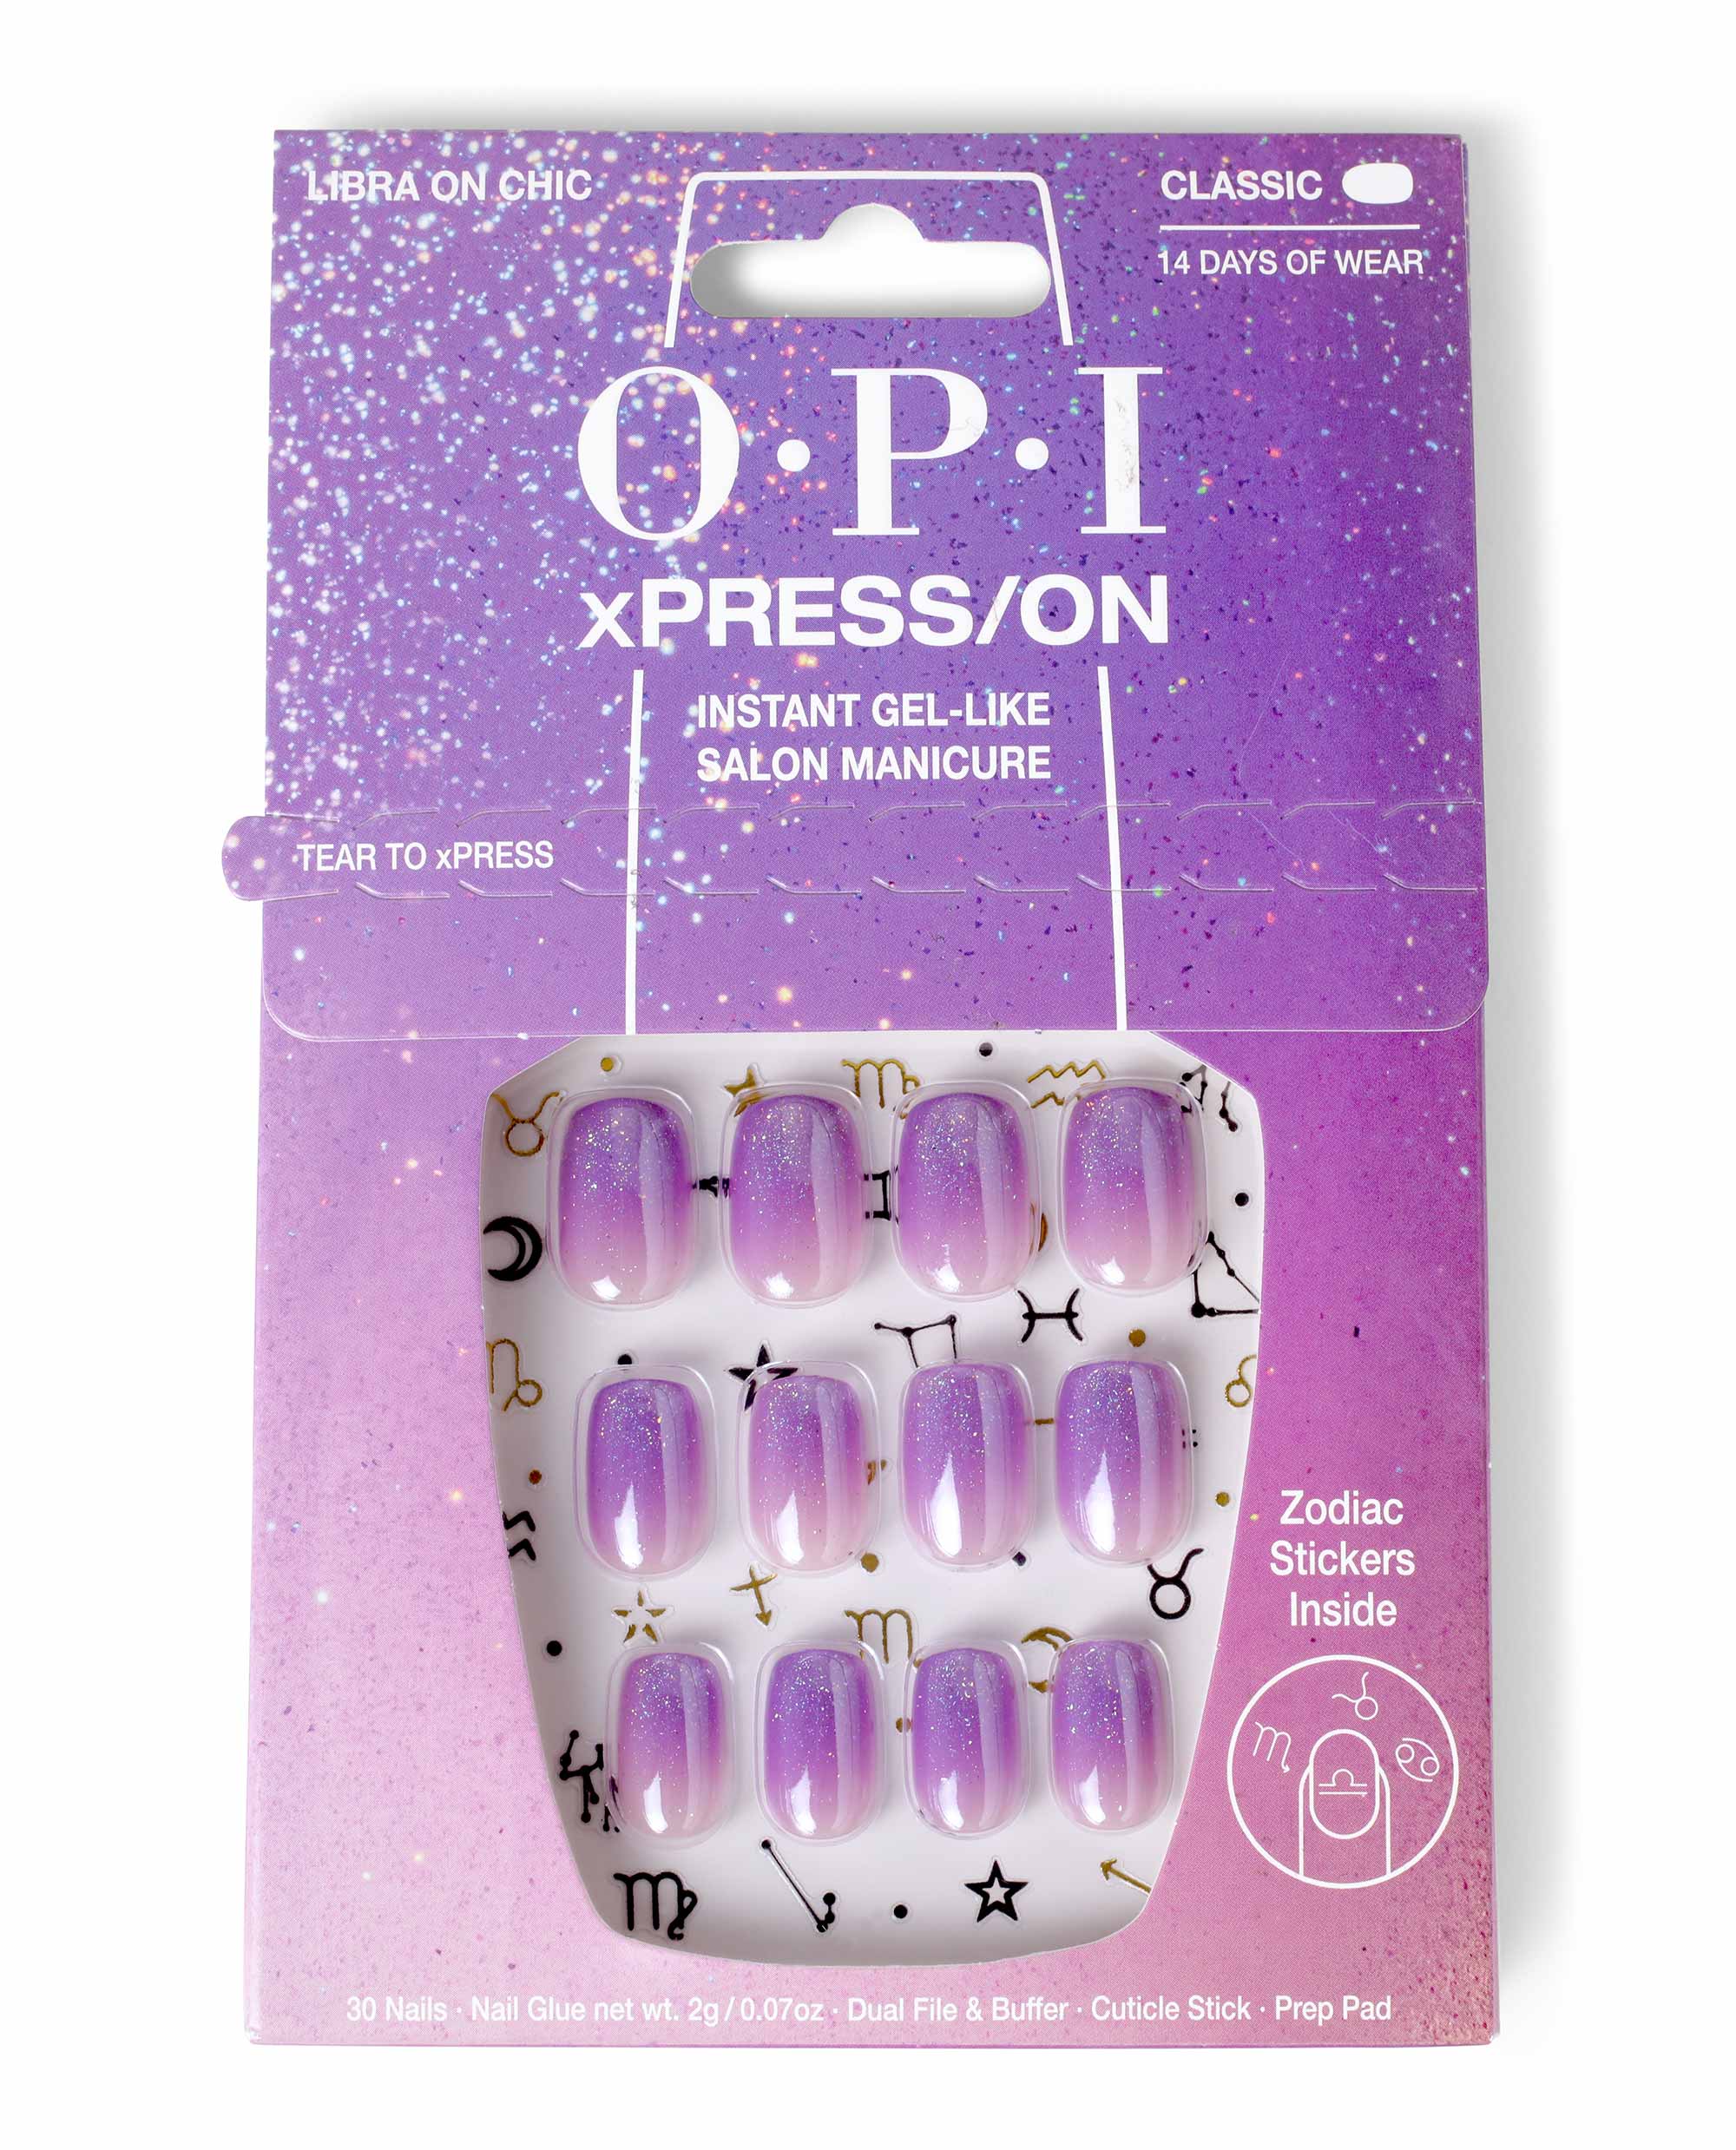 Libra on Chic Press On Nails |OPI